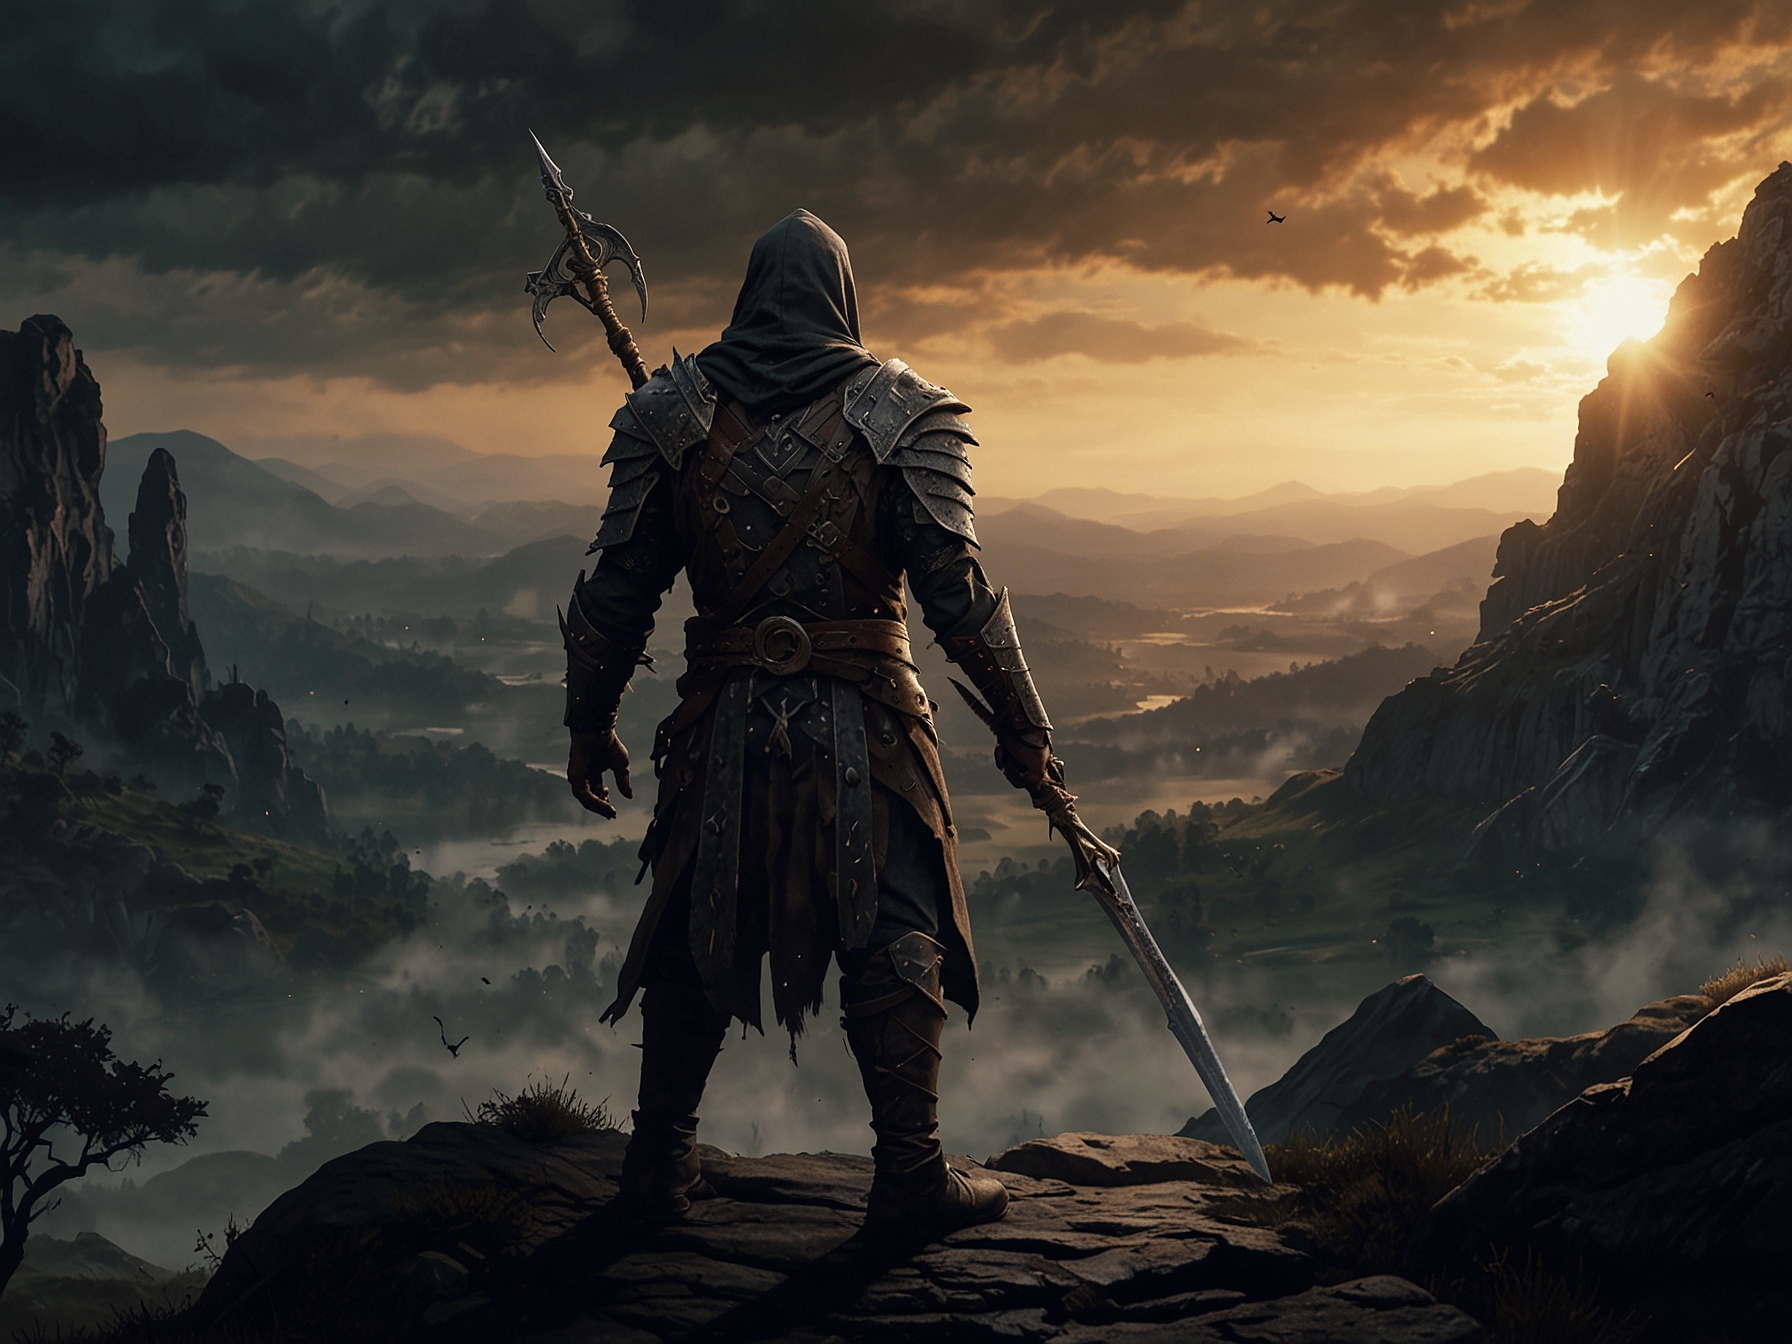 An Elden Ring player character, equipped with upgraded gear, stands ready for battle in a majestic, ominous landscape, hinting at the challenging new areas introduced in the Shadow of the Erdtree DLC.